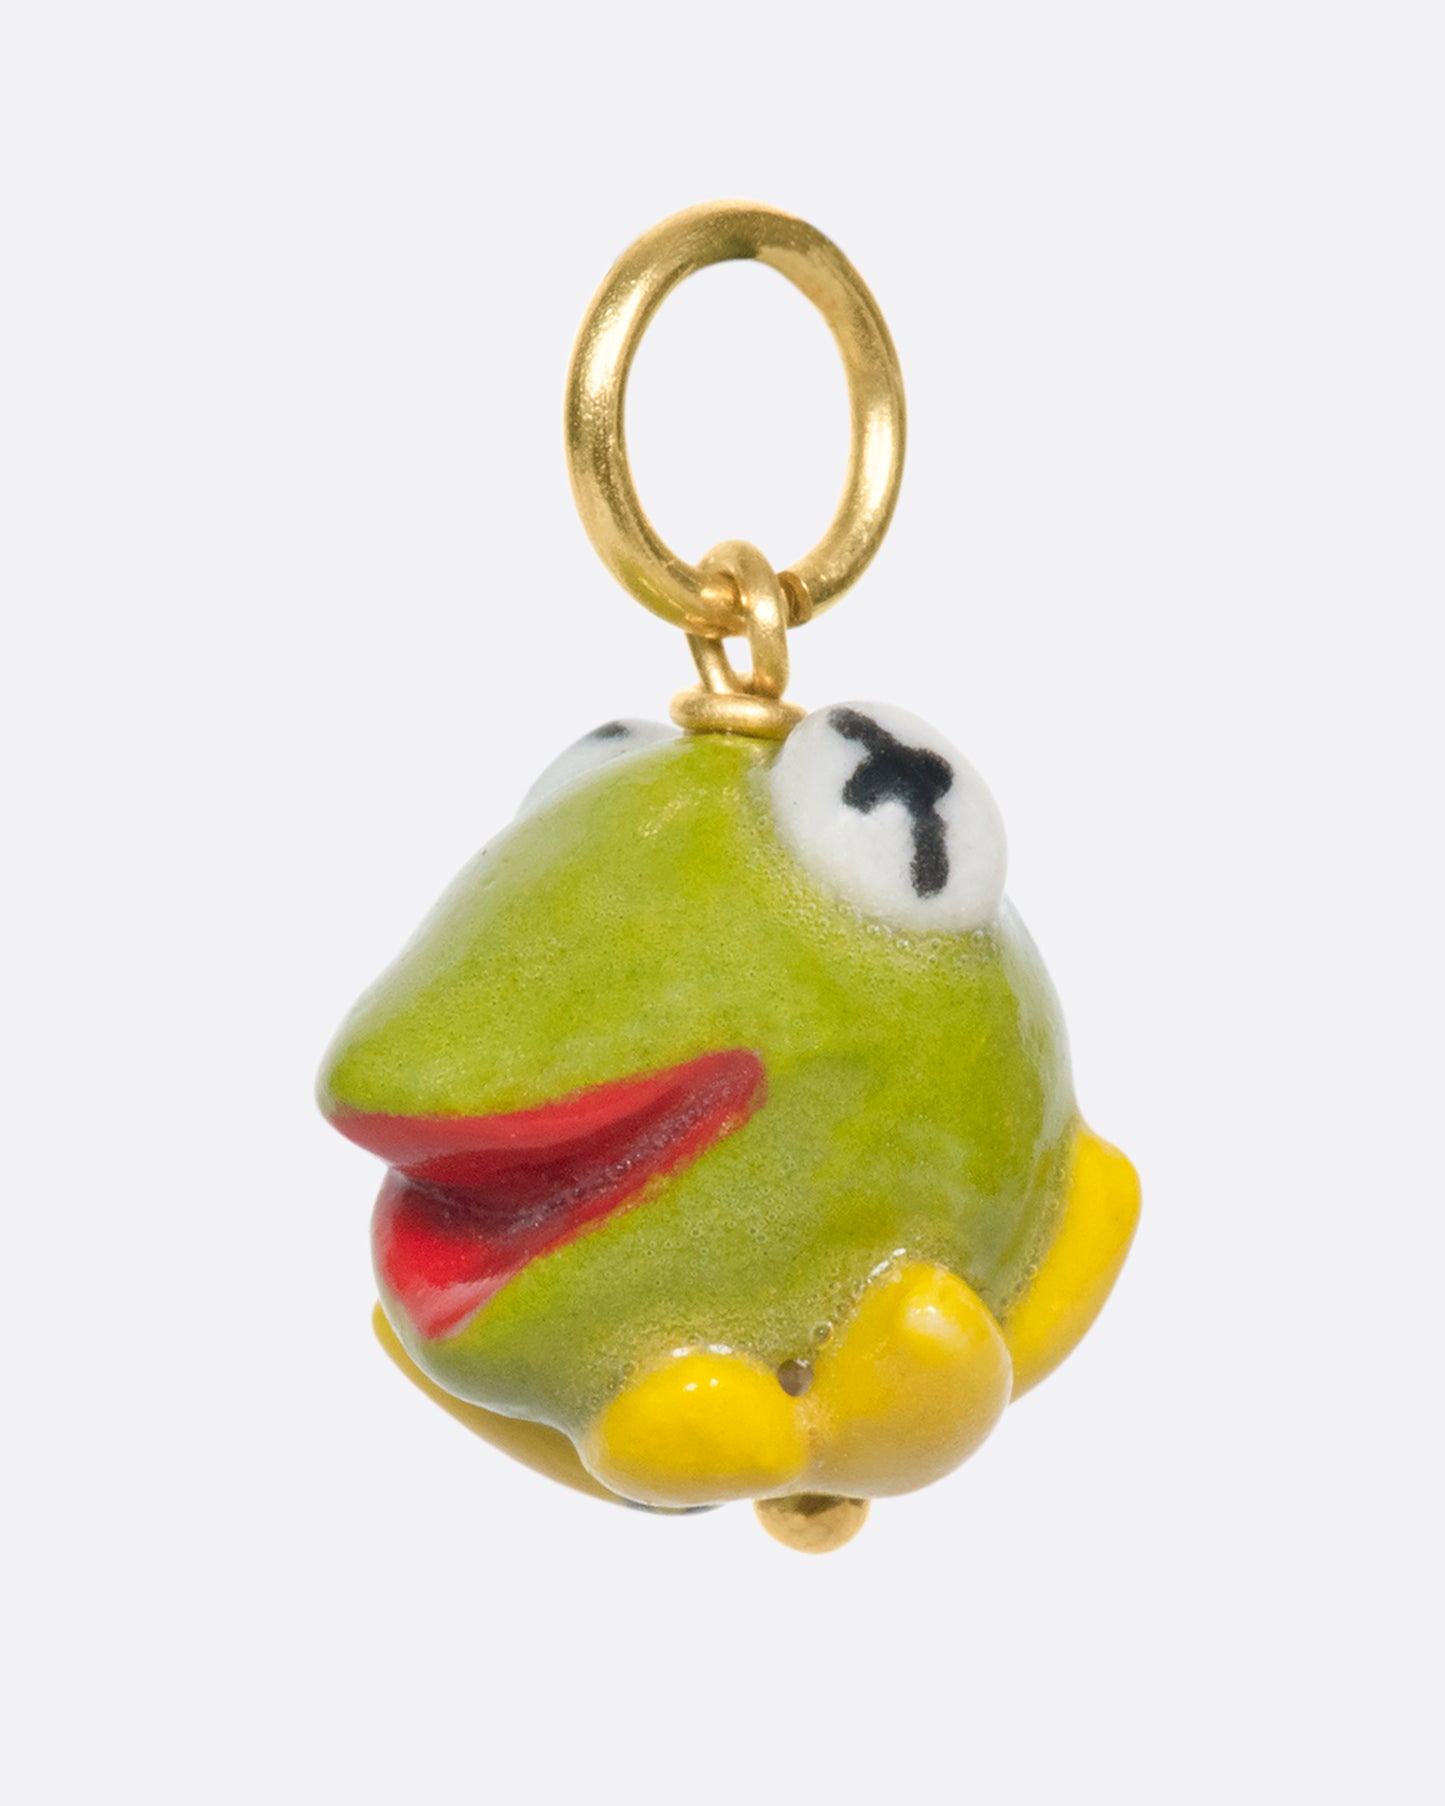 A handmade and painted porcelain Kermit the Frog charm with a gold bail.